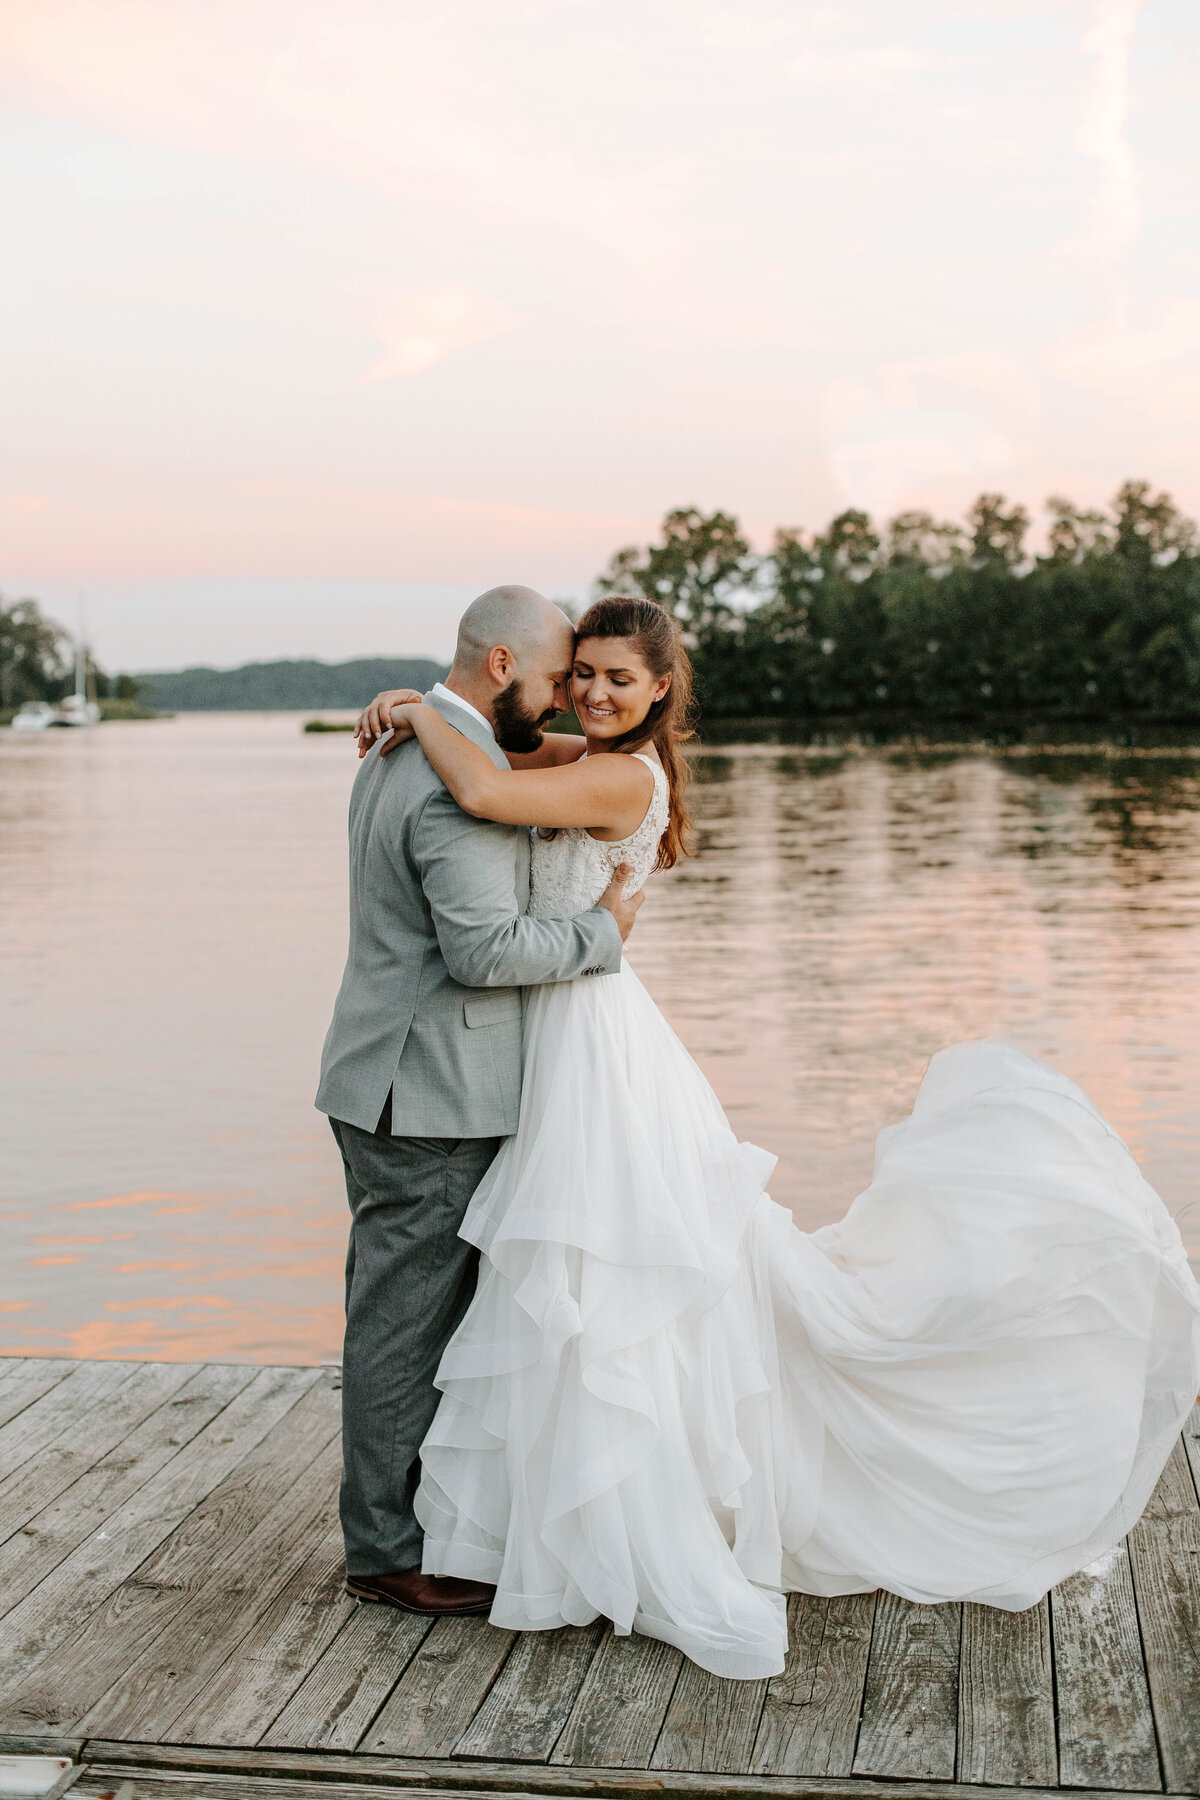 A bride and groom stand on a pier in front of water that is reflecting a colorful sunset. The groom has his face towards the bride as the bride looks at the camera while her dress flows in the wind